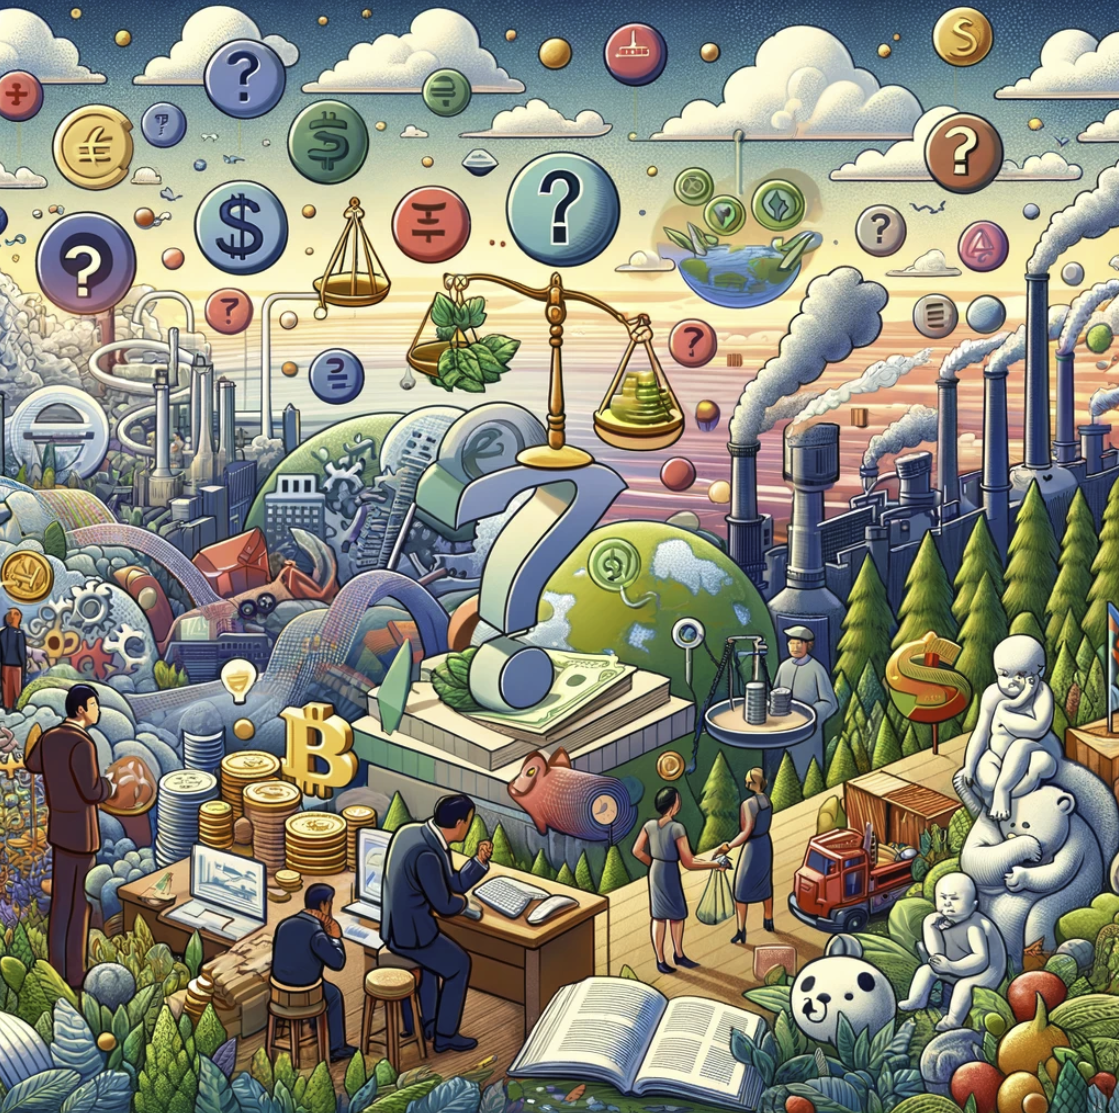 image that represents the philosophy of economics, showcasing a blend of economic symbols and philosophical elements. It captures the intricate relationship between economic activities, ethical considerations, and the broader quest to understand human behavior within the framework of scarcity and choice